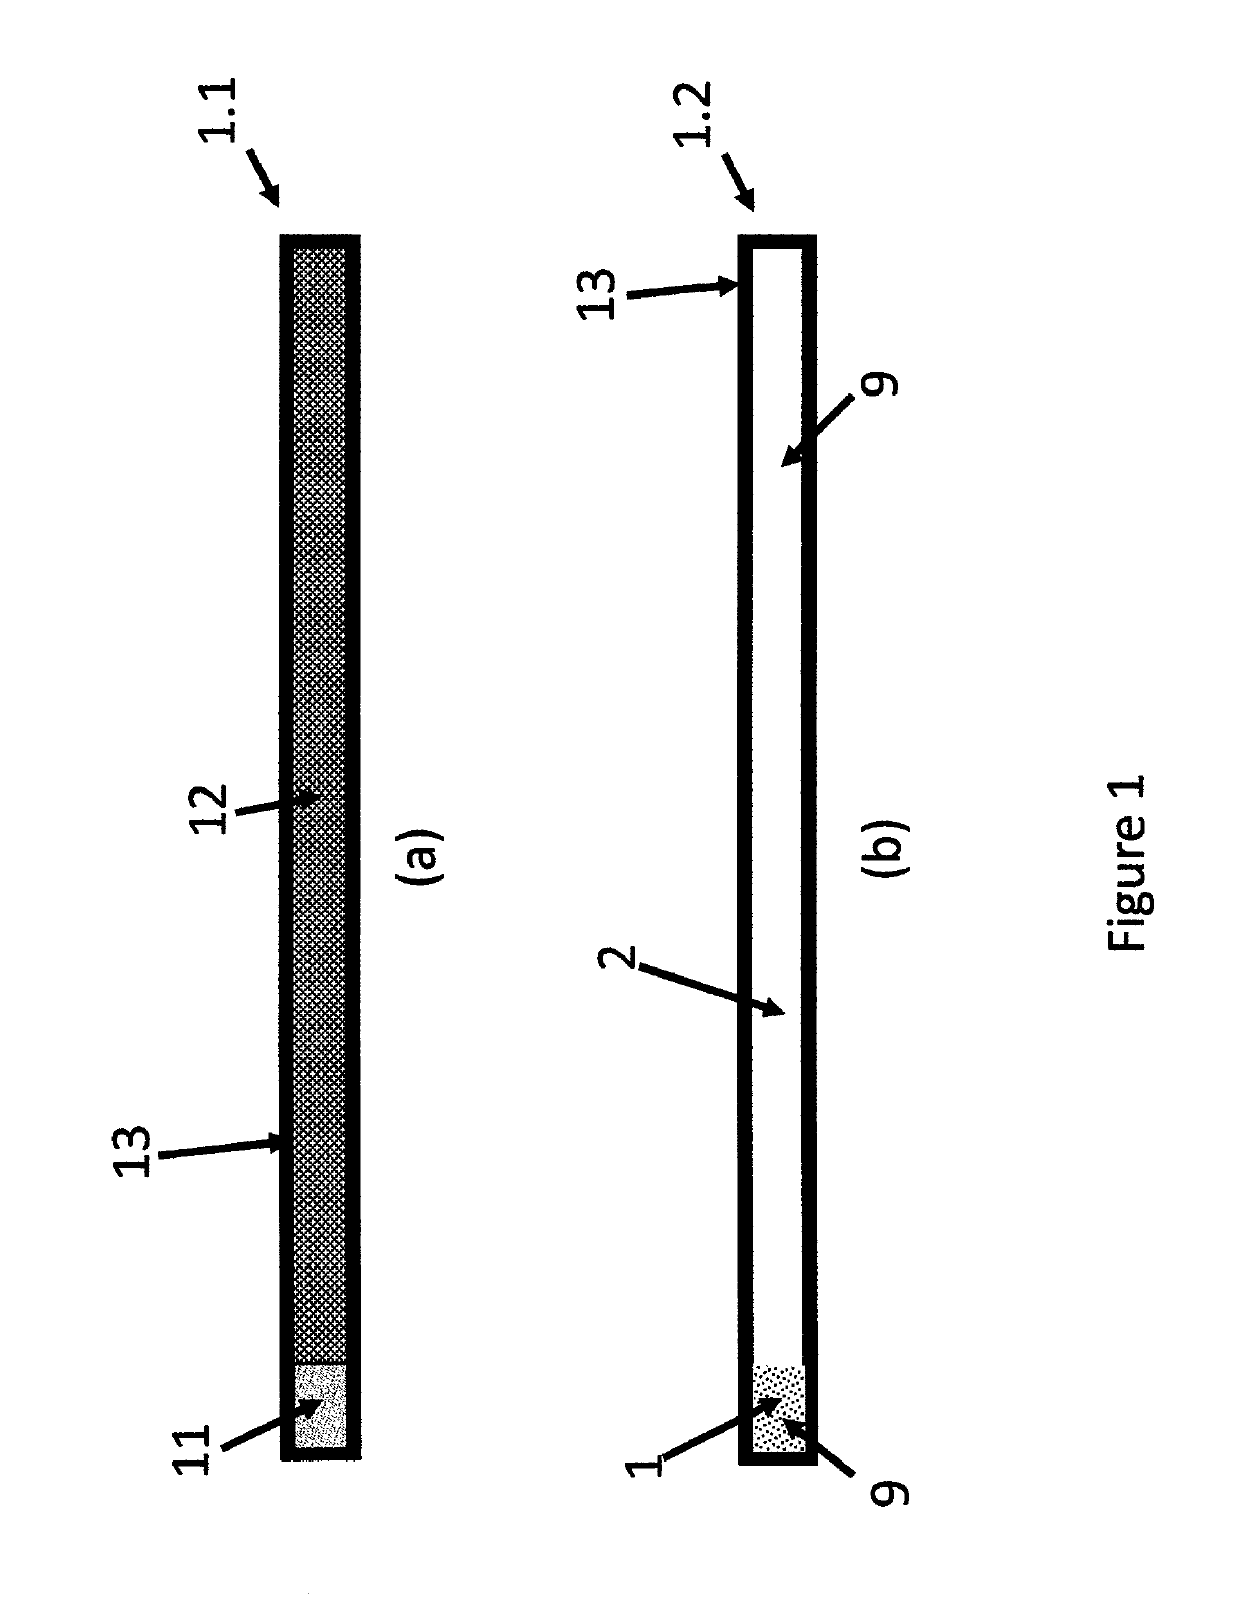 Indicating devices based on lateral diffusion of a mobile phase through a non-porous stationary phase